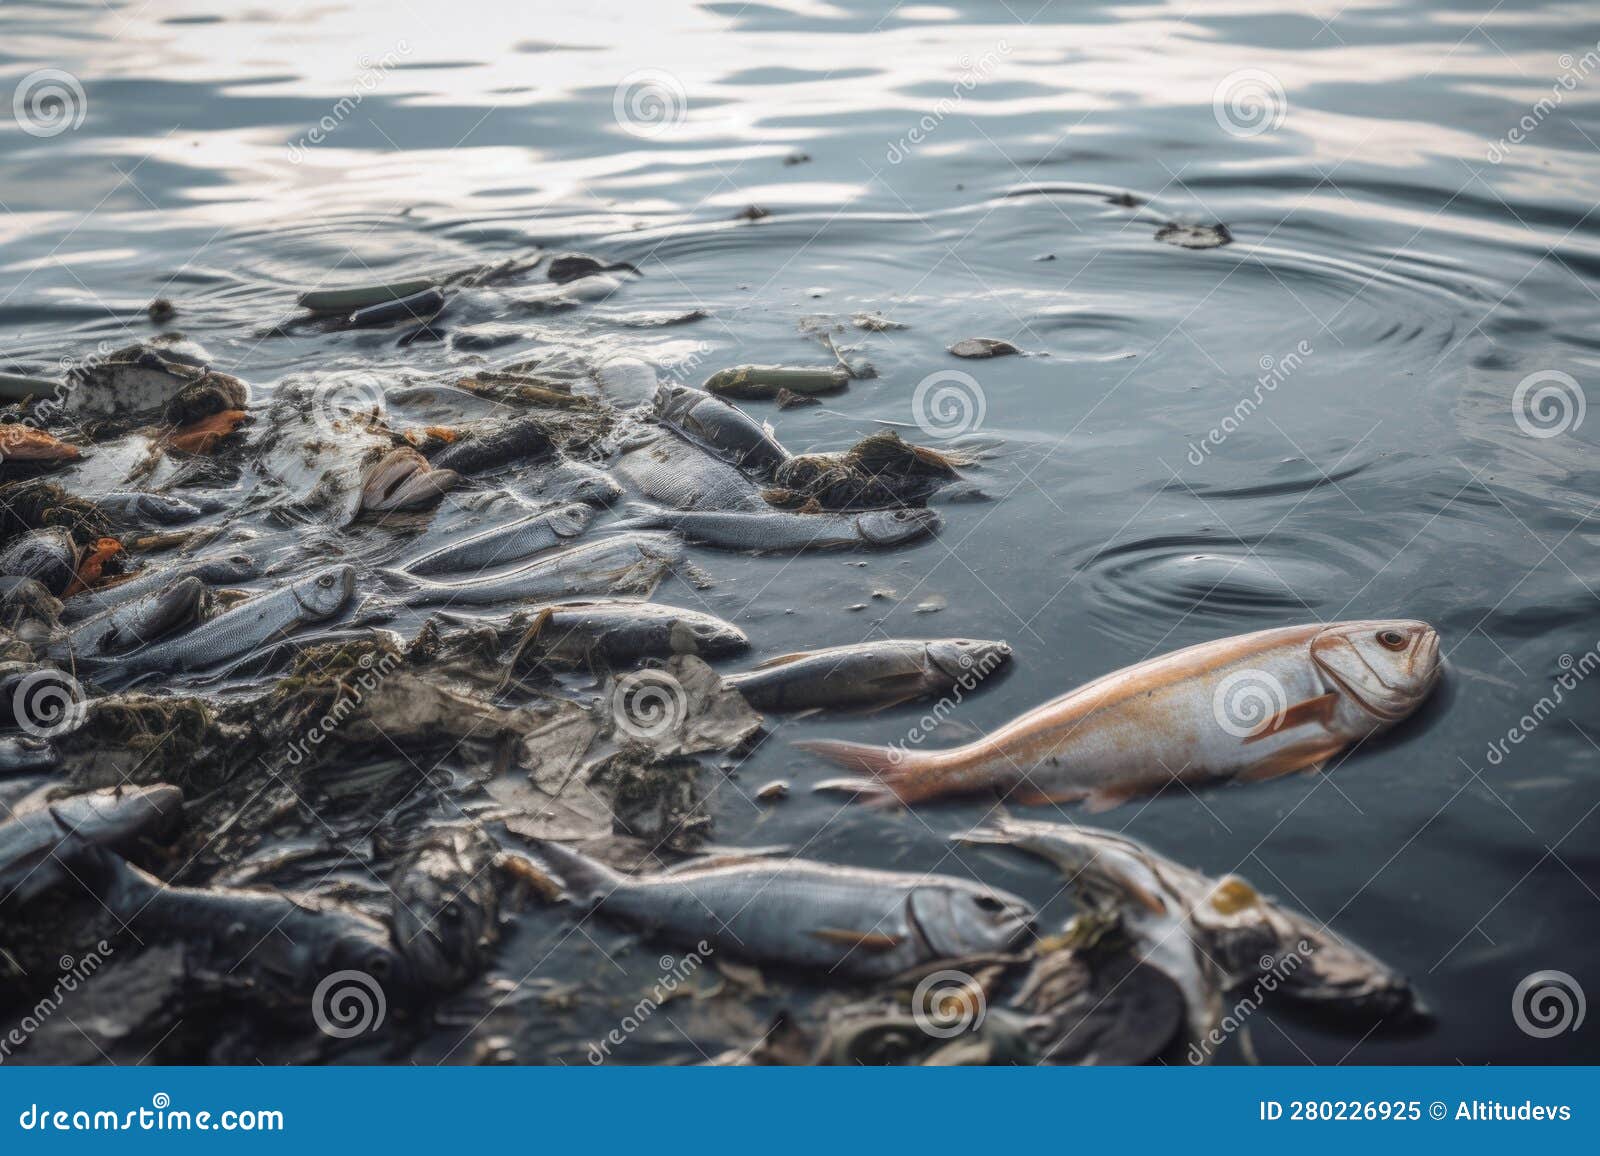 Chemical Waste Spill in the Ocean, with Dead Fish and Crabs Floating on ...